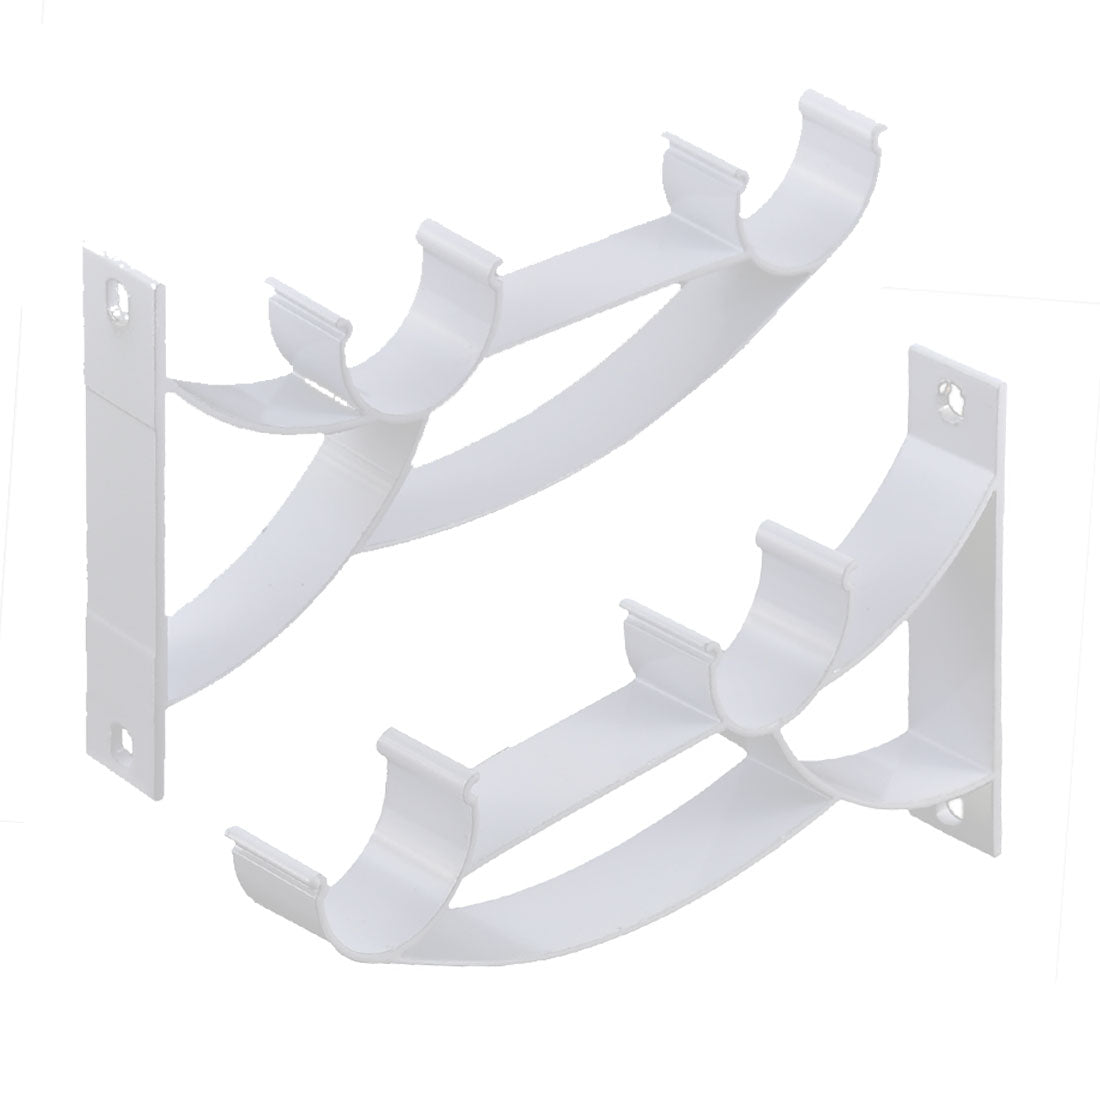 uxcell Uxcell Curtain Drapery Wall Install Double Pole Rod Bracket White 24mm Dia 6pcs